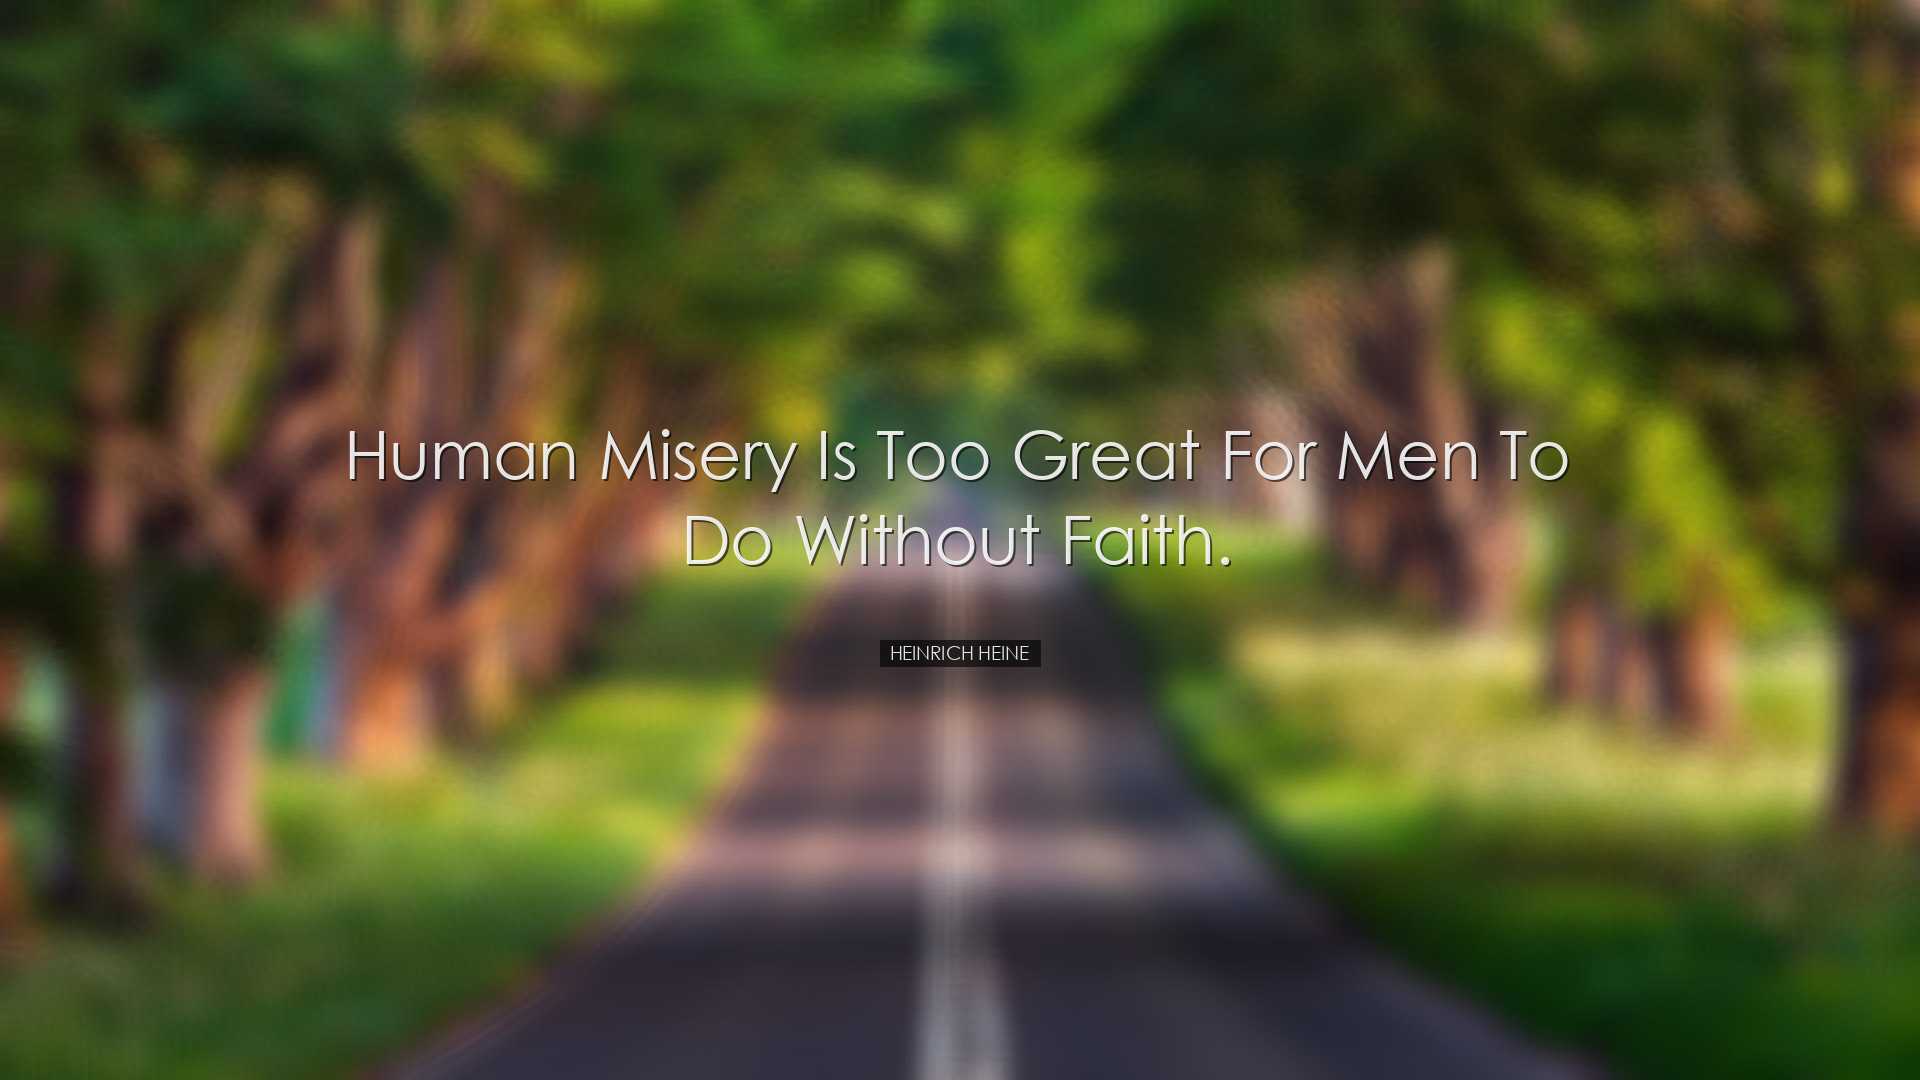 Human misery is too great for men to do without faith. - Heinrich